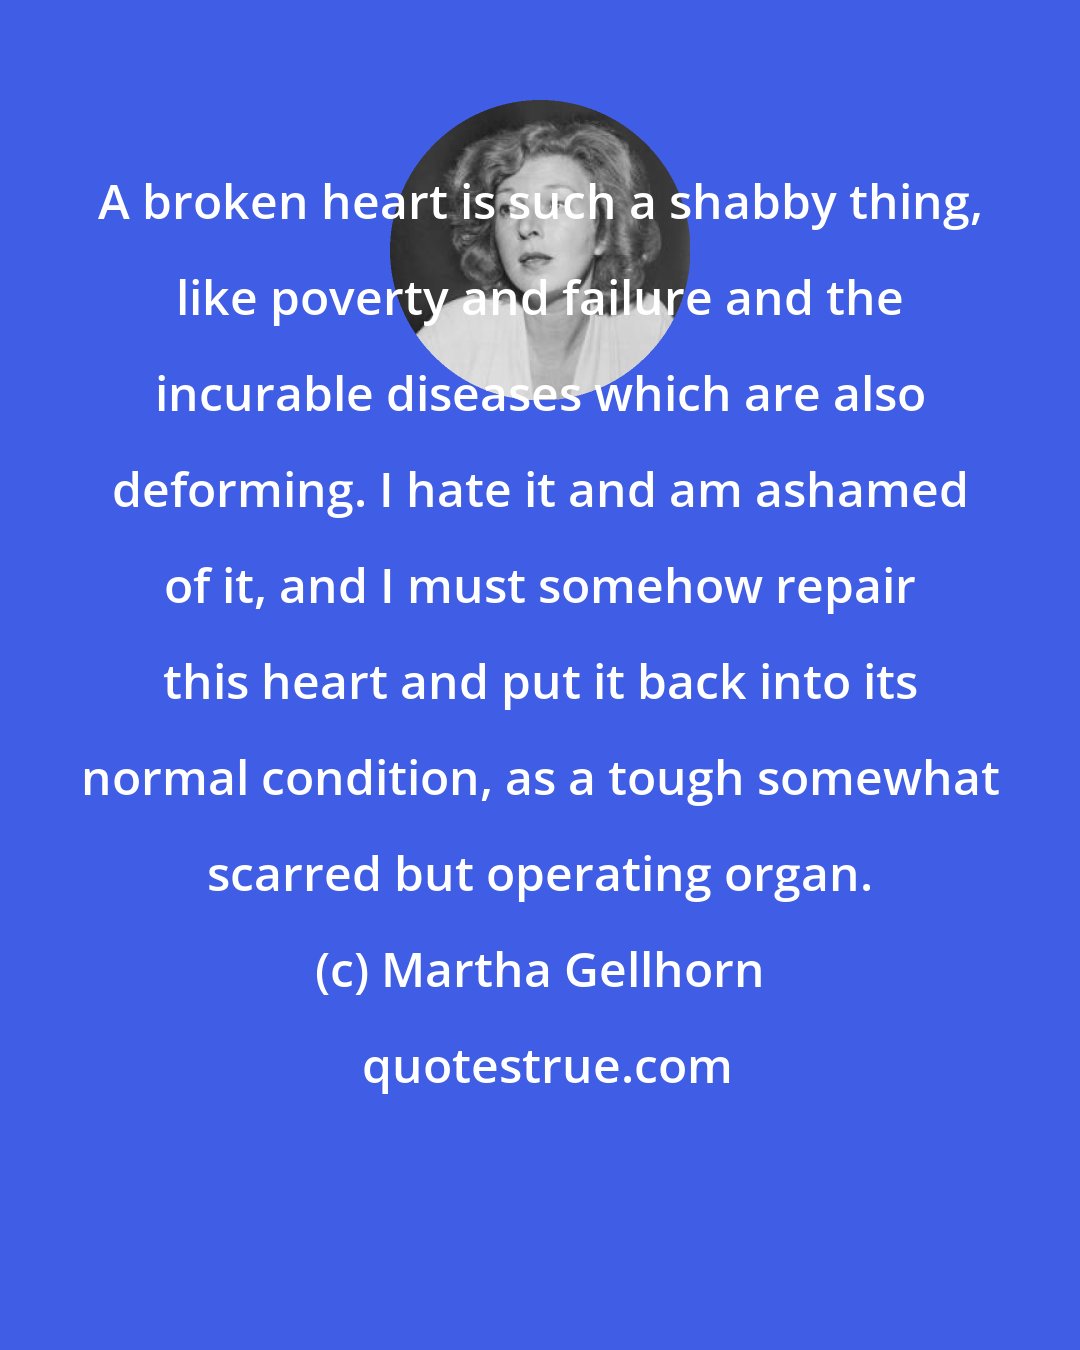 Martha Gellhorn: A broken heart is such a shabby thing, like poverty and failure and the incurable diseases which are also deforming. I hate it and am ashamed of it, and I must somehow repair this heart and put it back into its normal condition, as a tough somewhat scarred but operating organ.